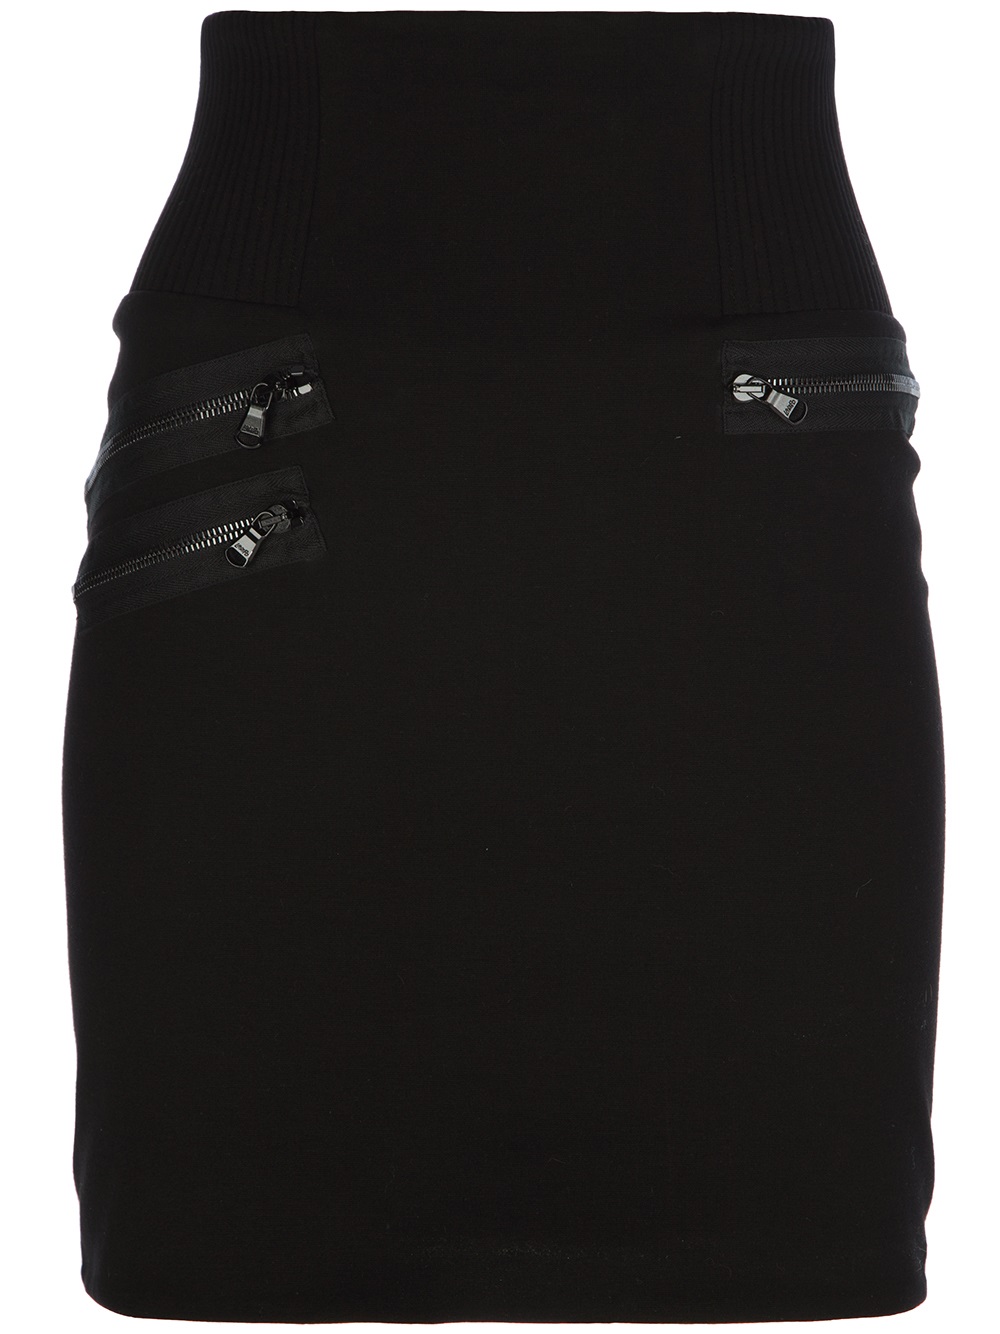 Lyst - 3.1 Phillip Lim Fitted High Waisted Skirt in Black